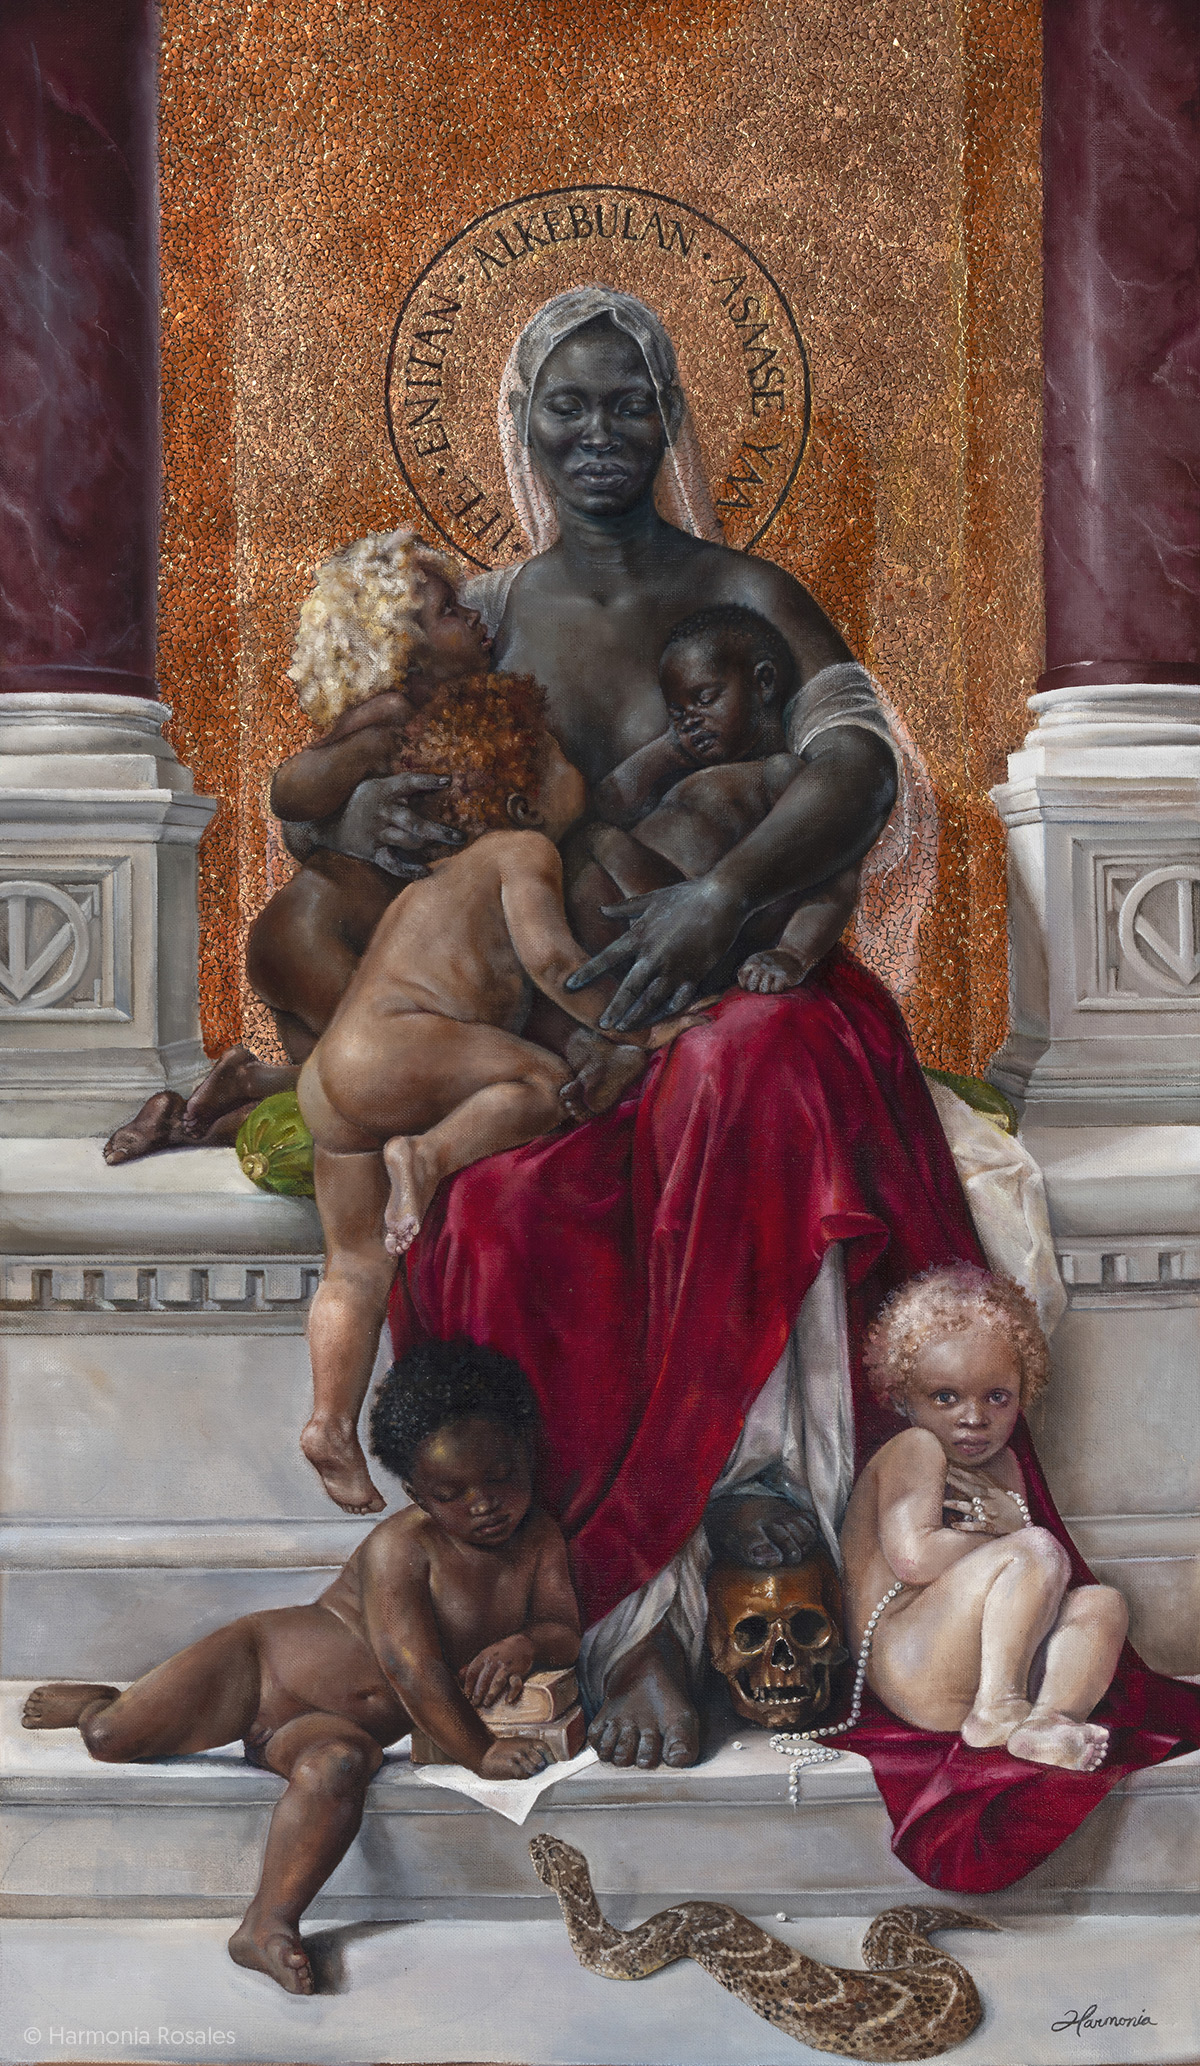 Powerful Portraits Of Black Figures Painted In The Classical European Style By Harmonia Rosales 5